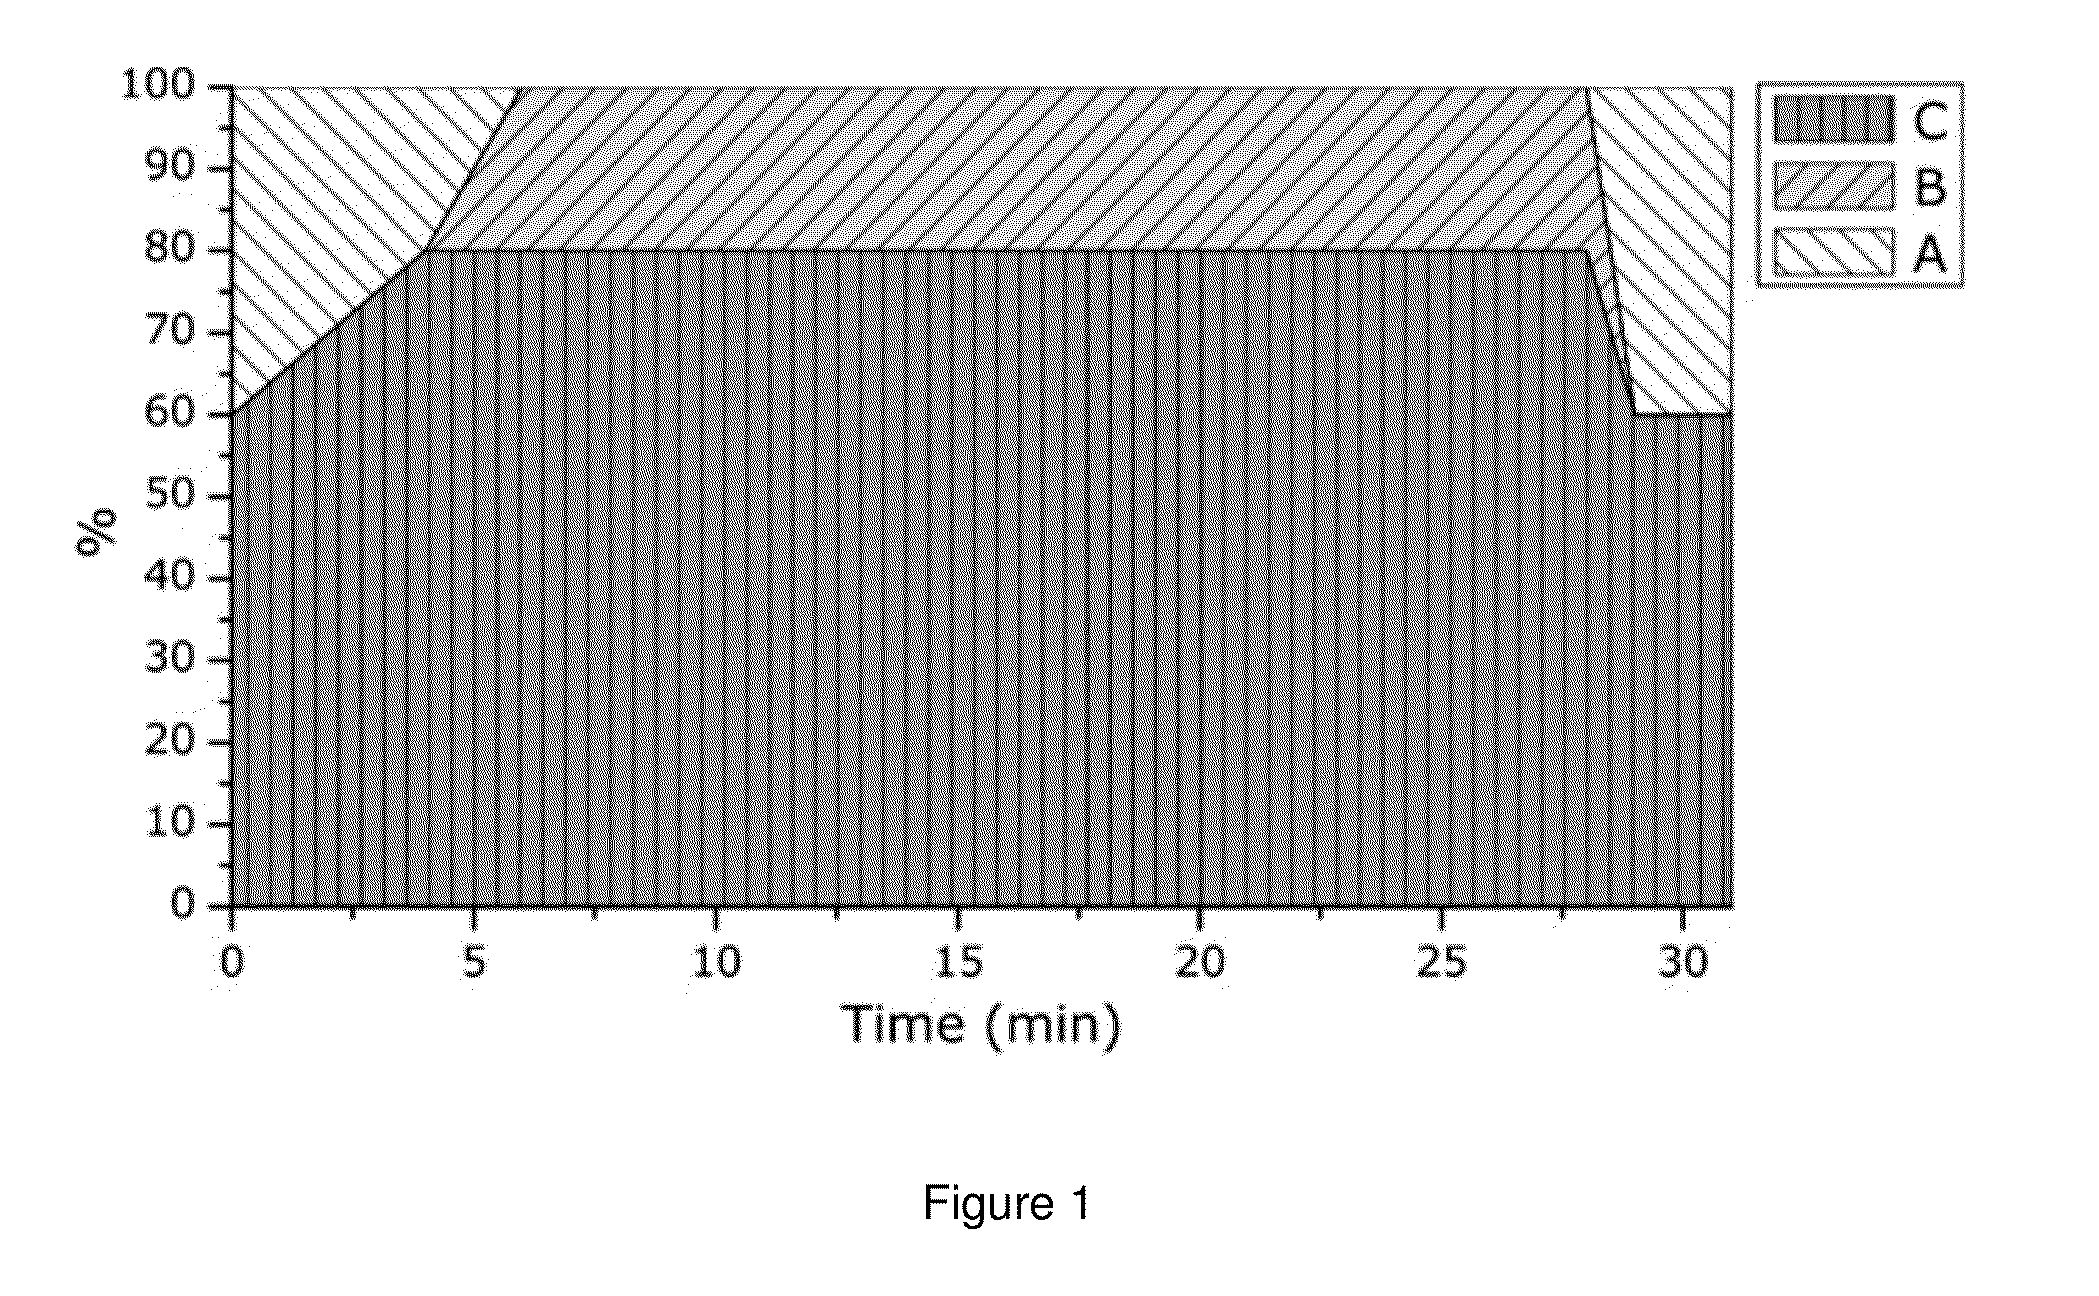 Liposomes containing permeation enhancers for oral drug delivery